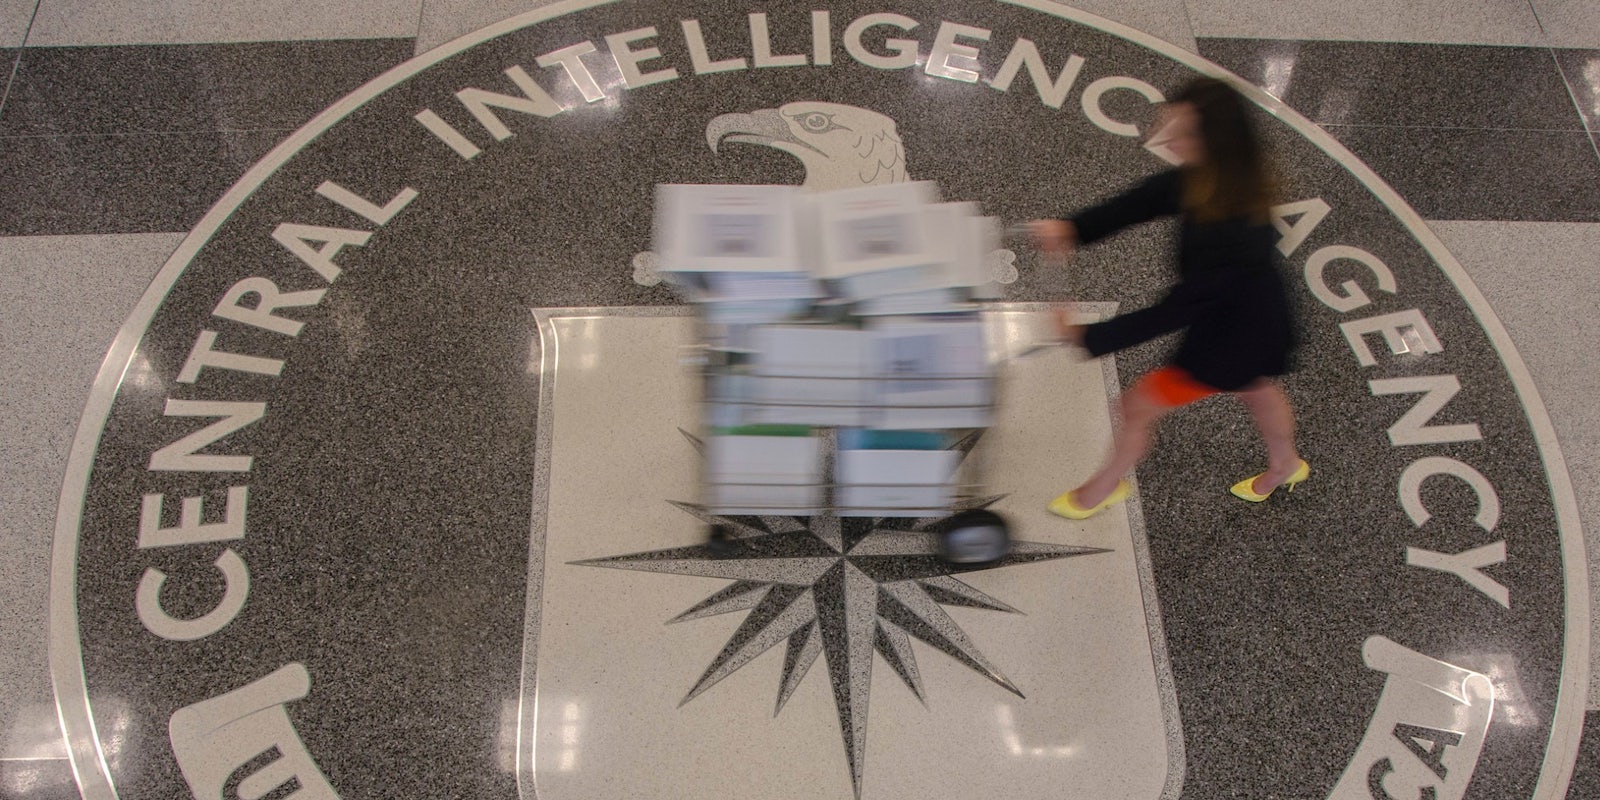 The logo for the central intelligence agency